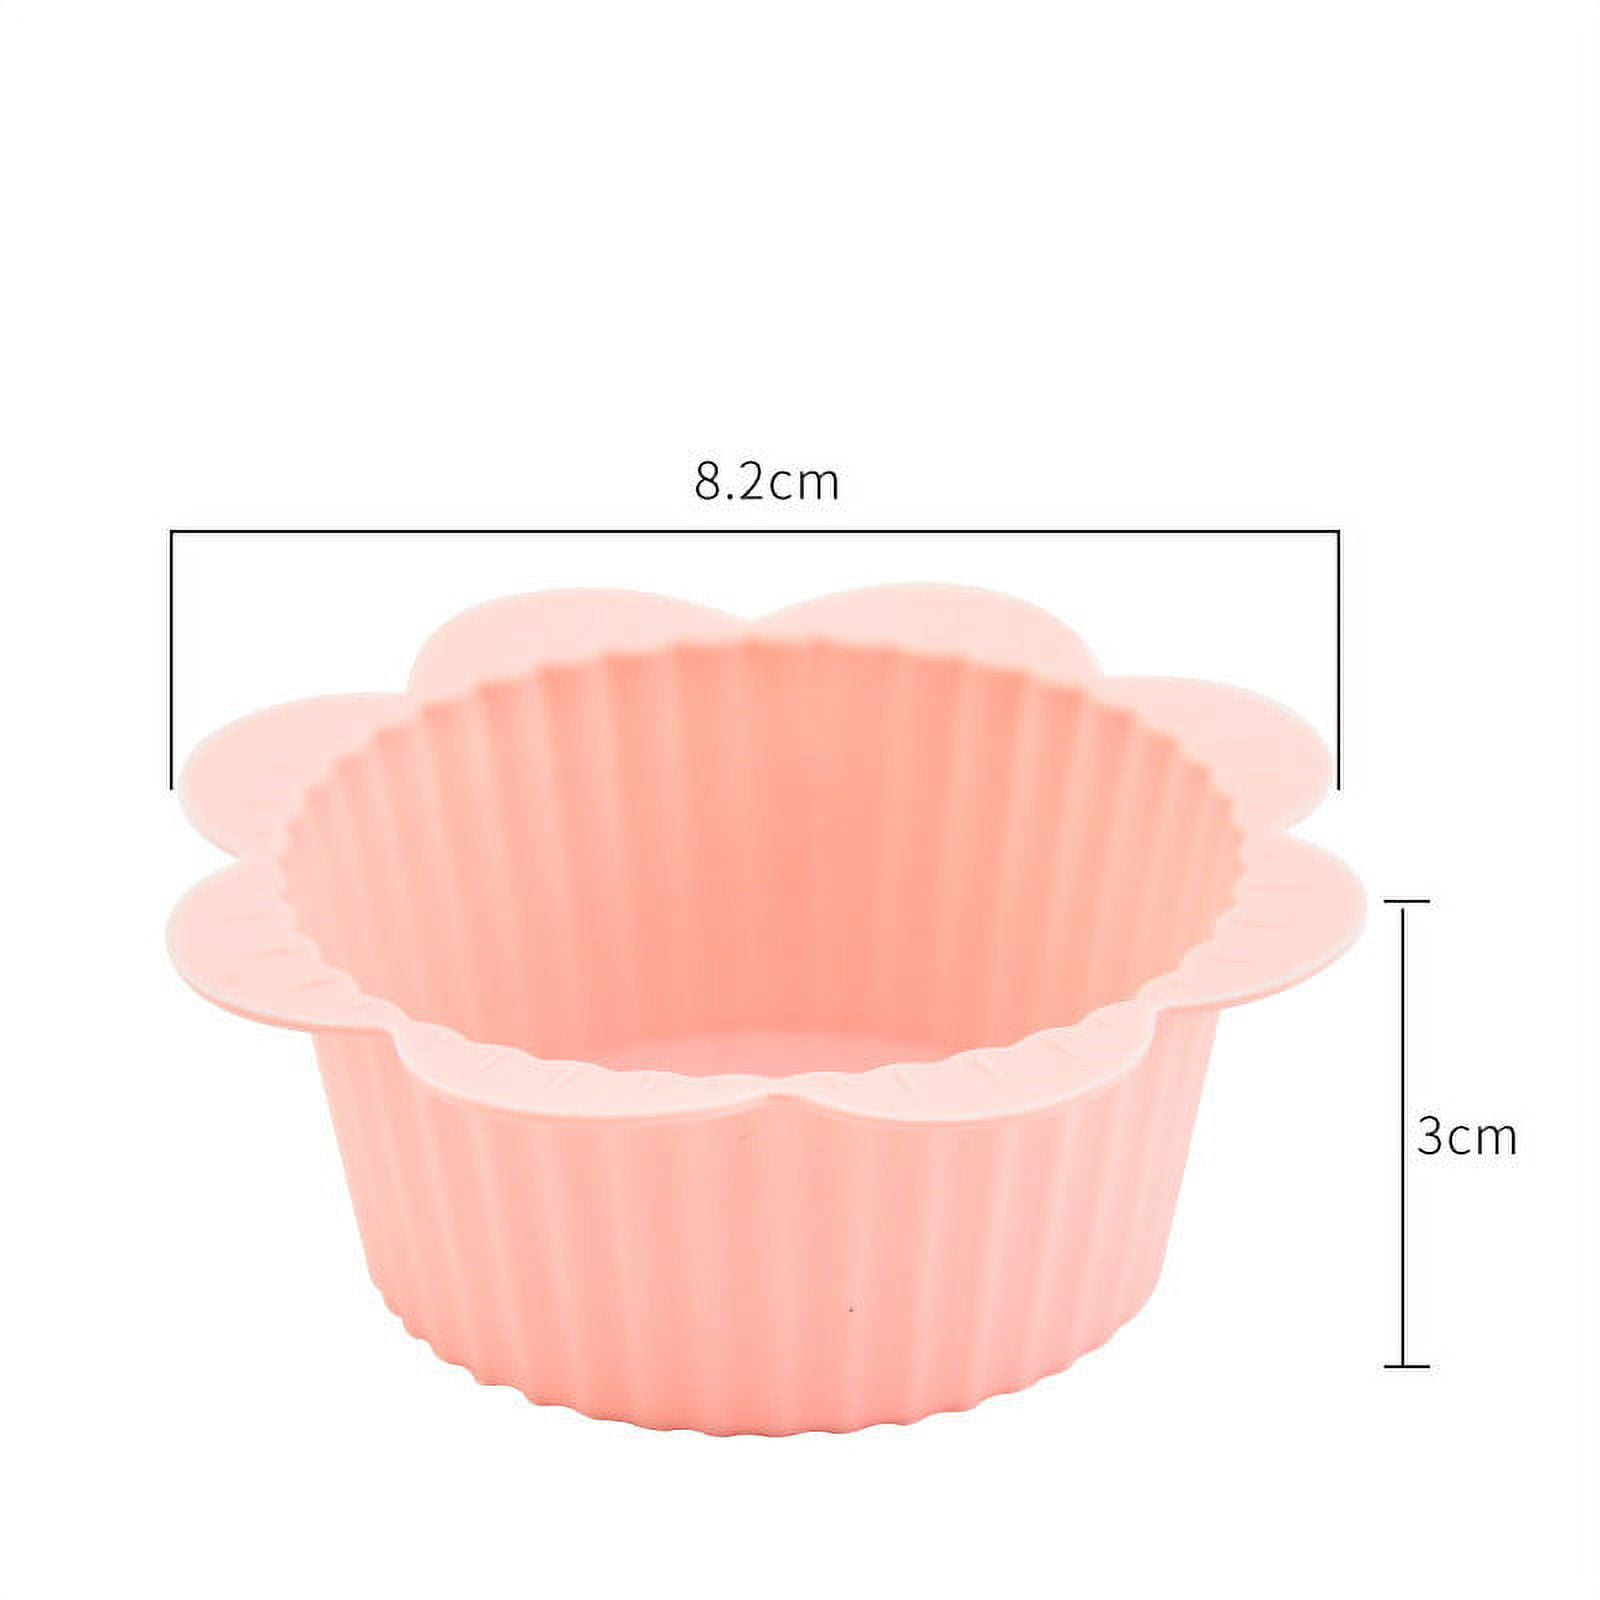 Reusable Cupcake Liners 36 Pcs Silicone Lunch Box Dividers, Non-Stick  Food-Grade Silicone Muffin Cups, Bento Box Accessories for Kids